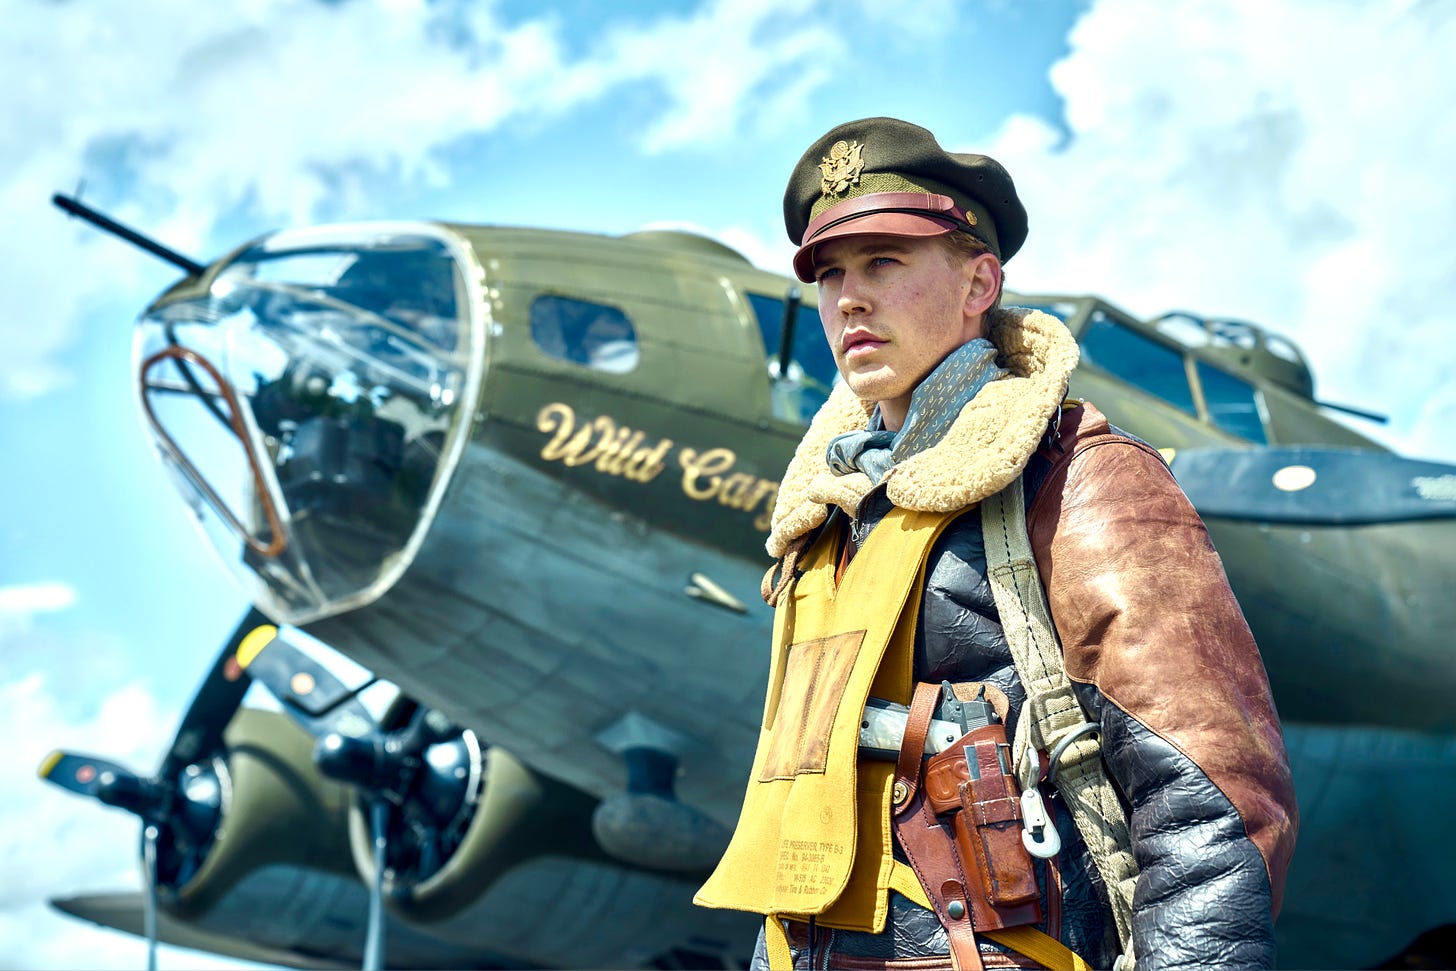 A pilot in a flight suit stands next to a WWII-era bomber